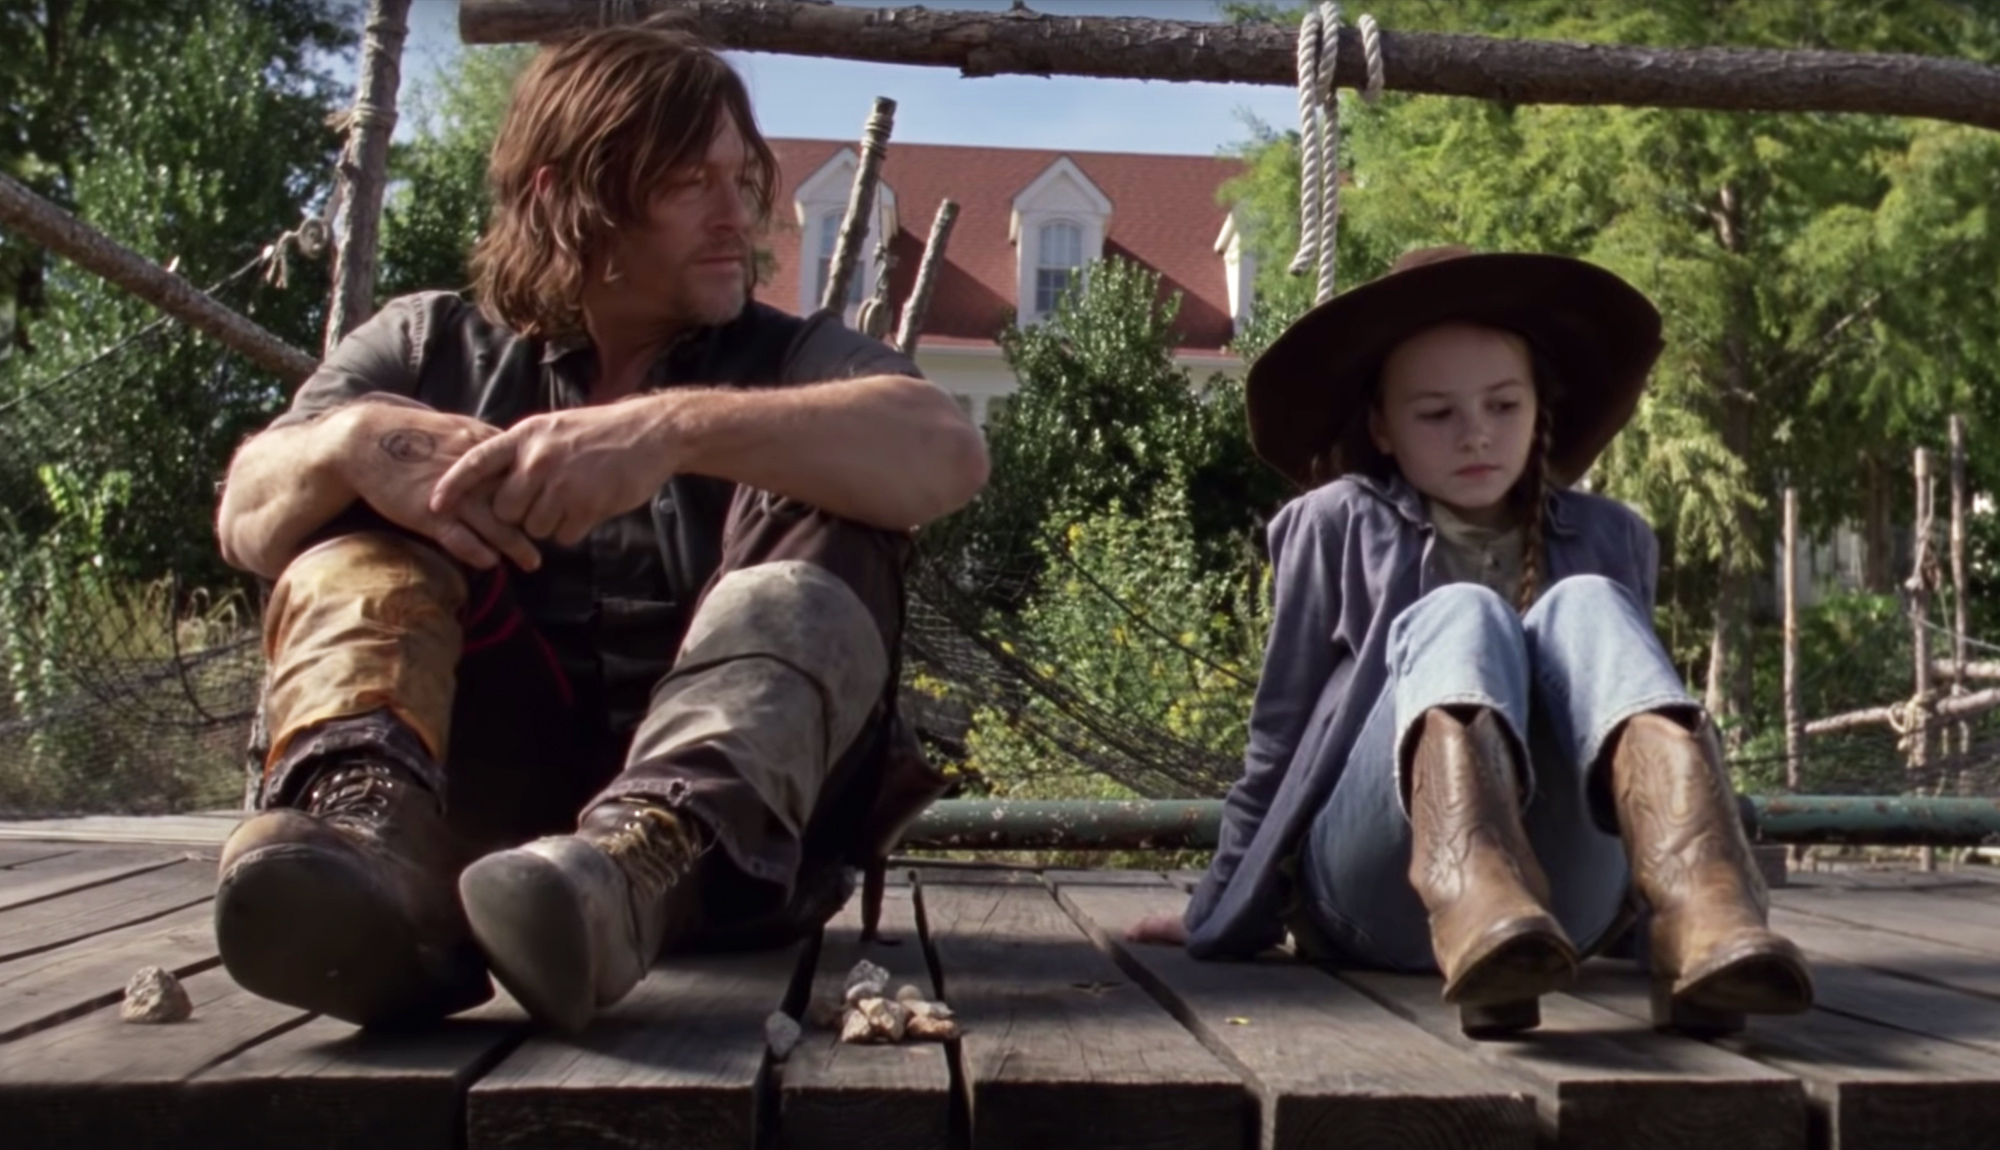 Daryl and Judith Talk About Rick In The Walking Dead Episode 914